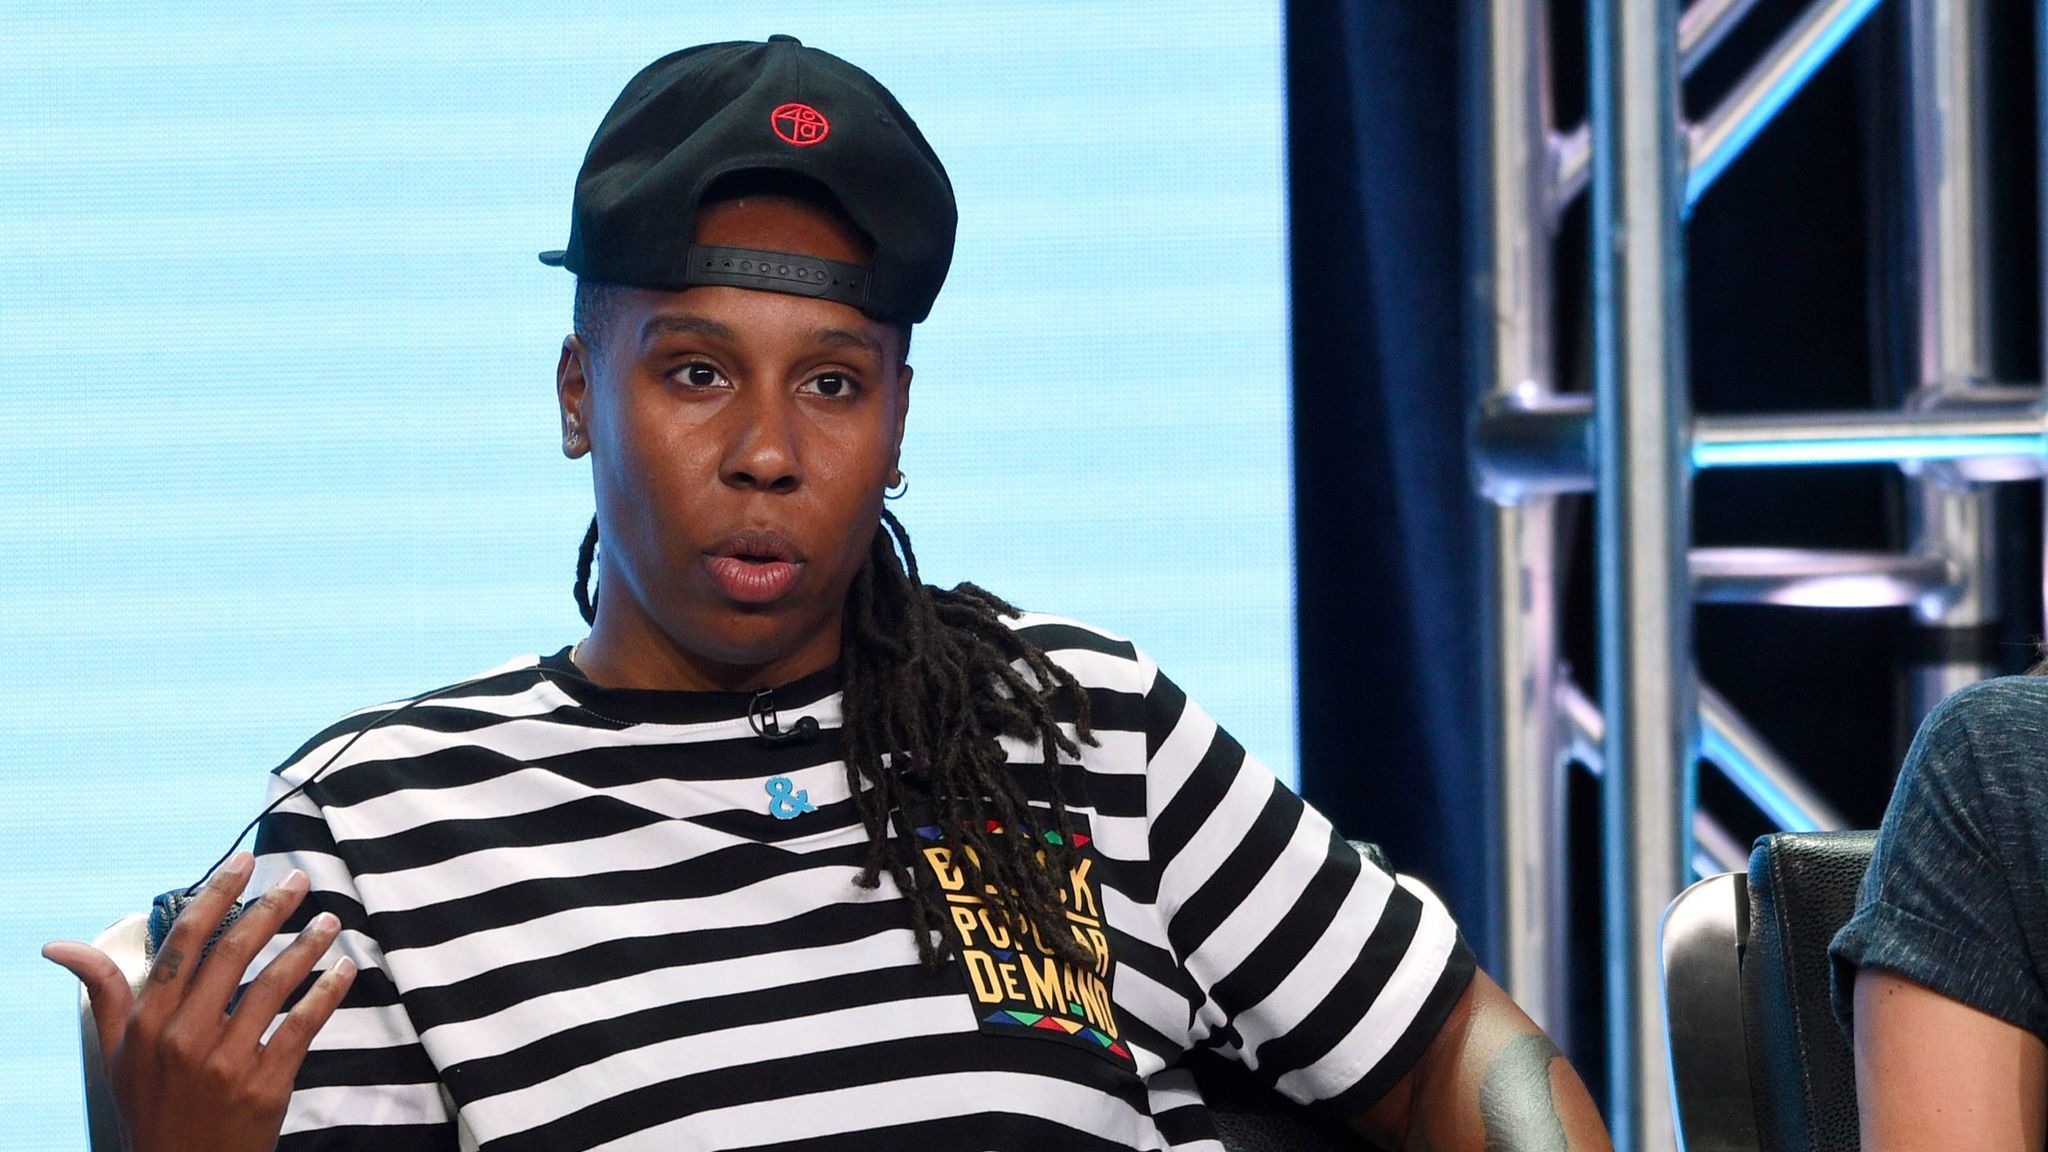 Lena Waithe participates in the "Lesbian, Gay, and Bisexual Trends on TV Today" panel at the Television Critics Assn. Summer Press Tour. (Chris Pizzello/Invision/AP)